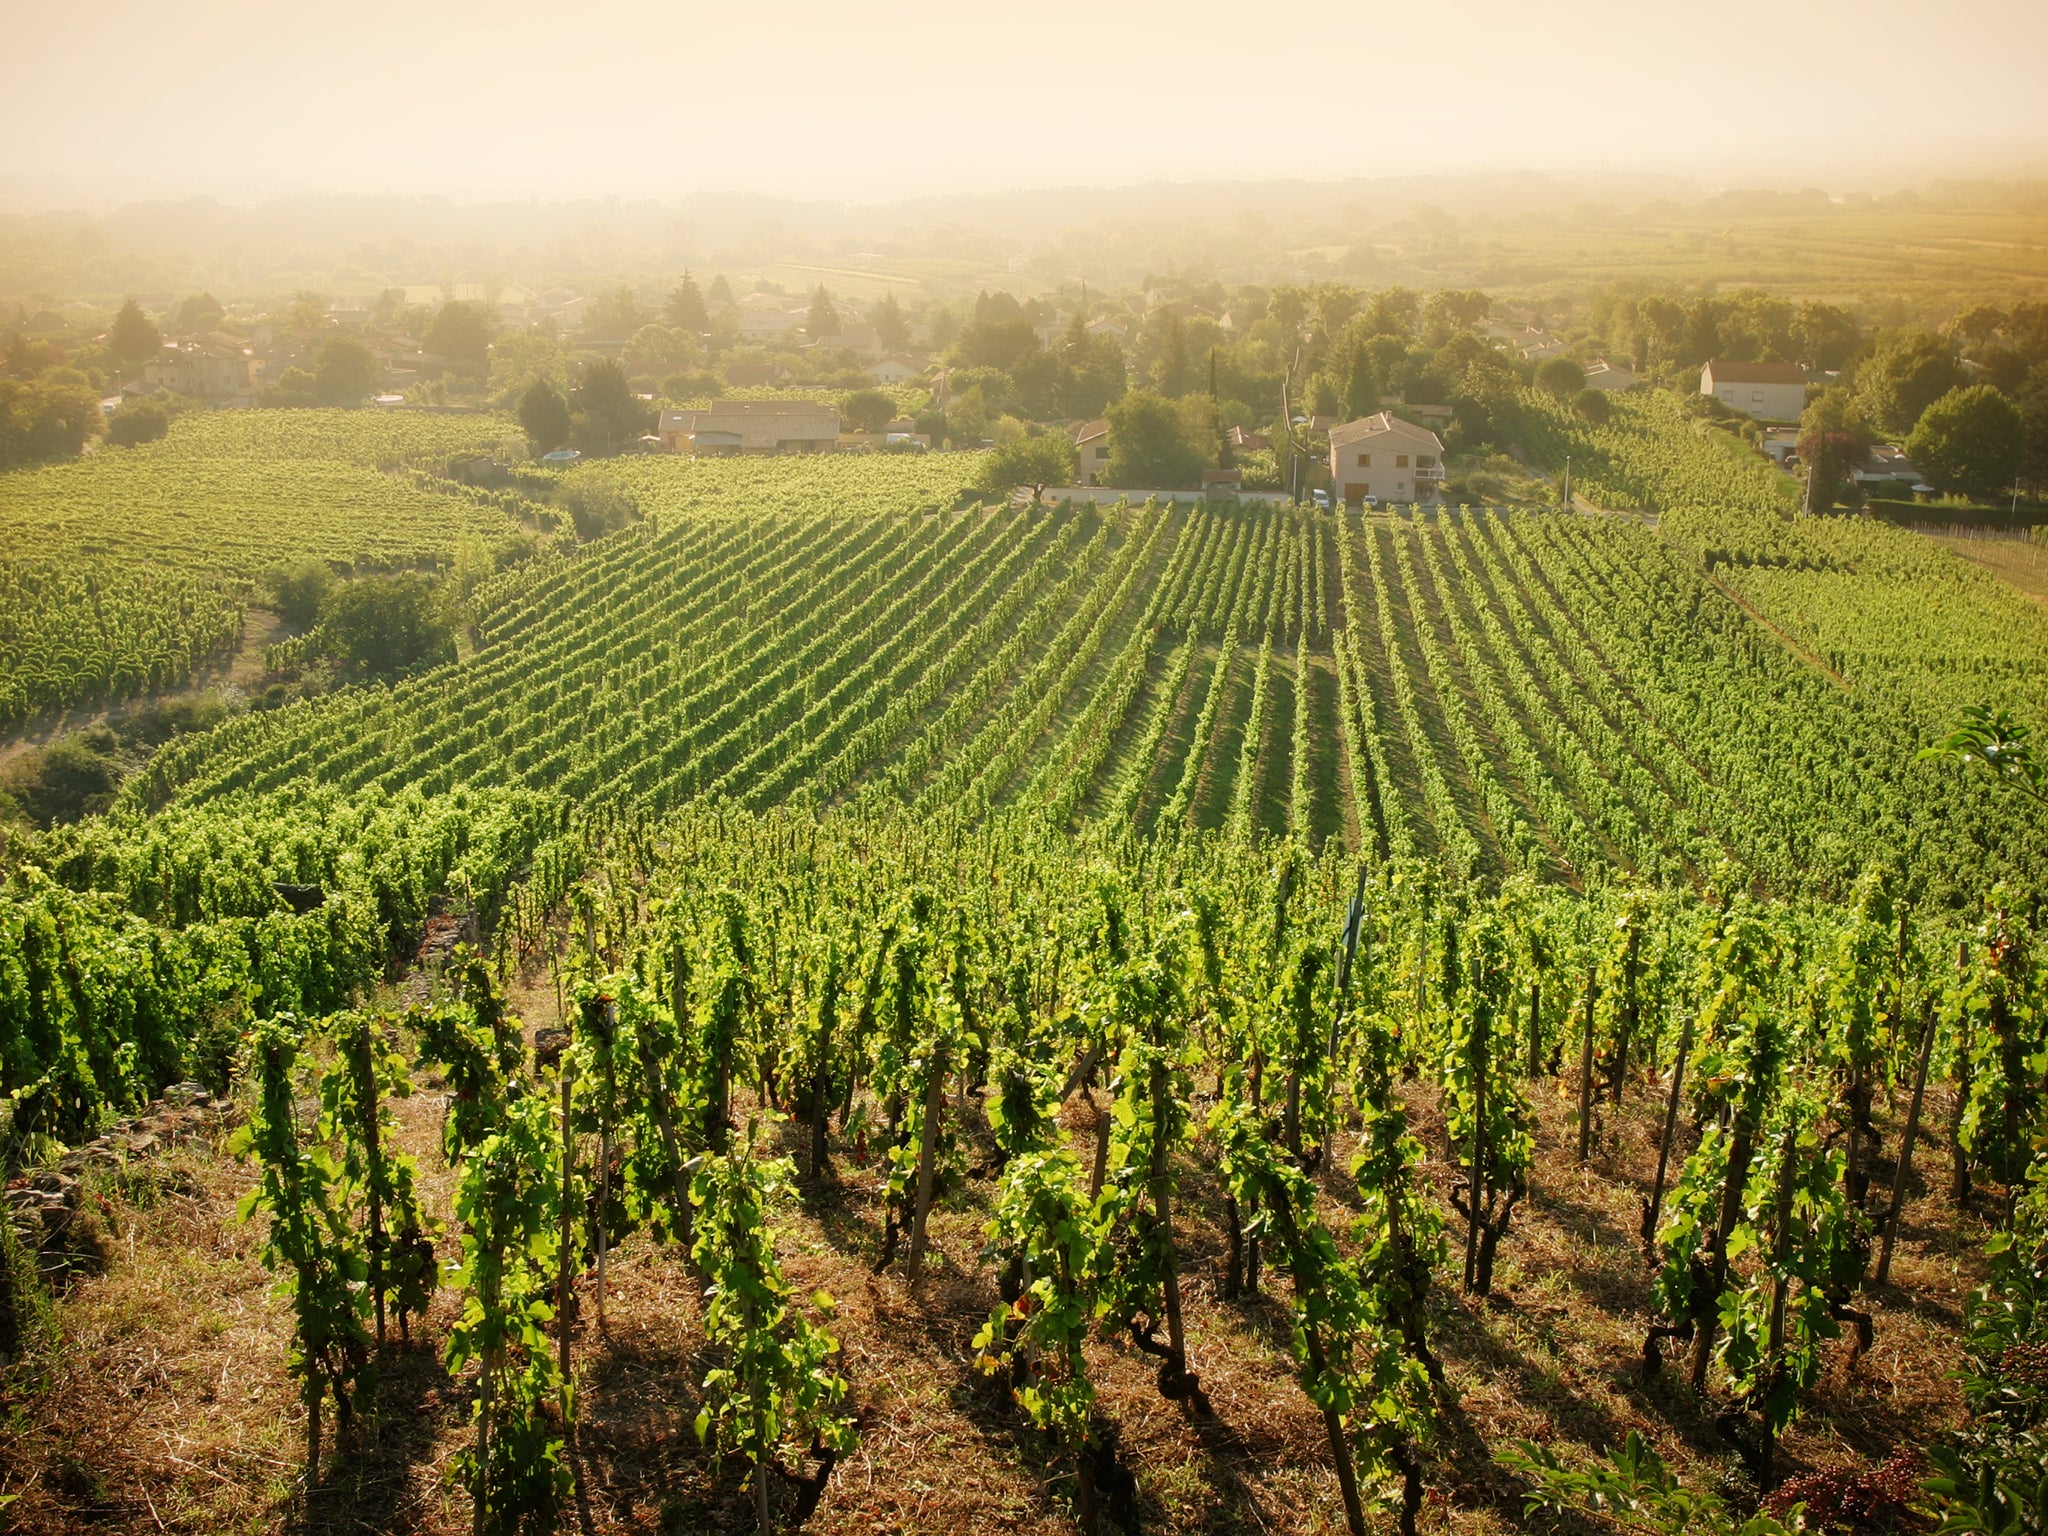 The Rhône Valley is the second largest wine-growing region in France